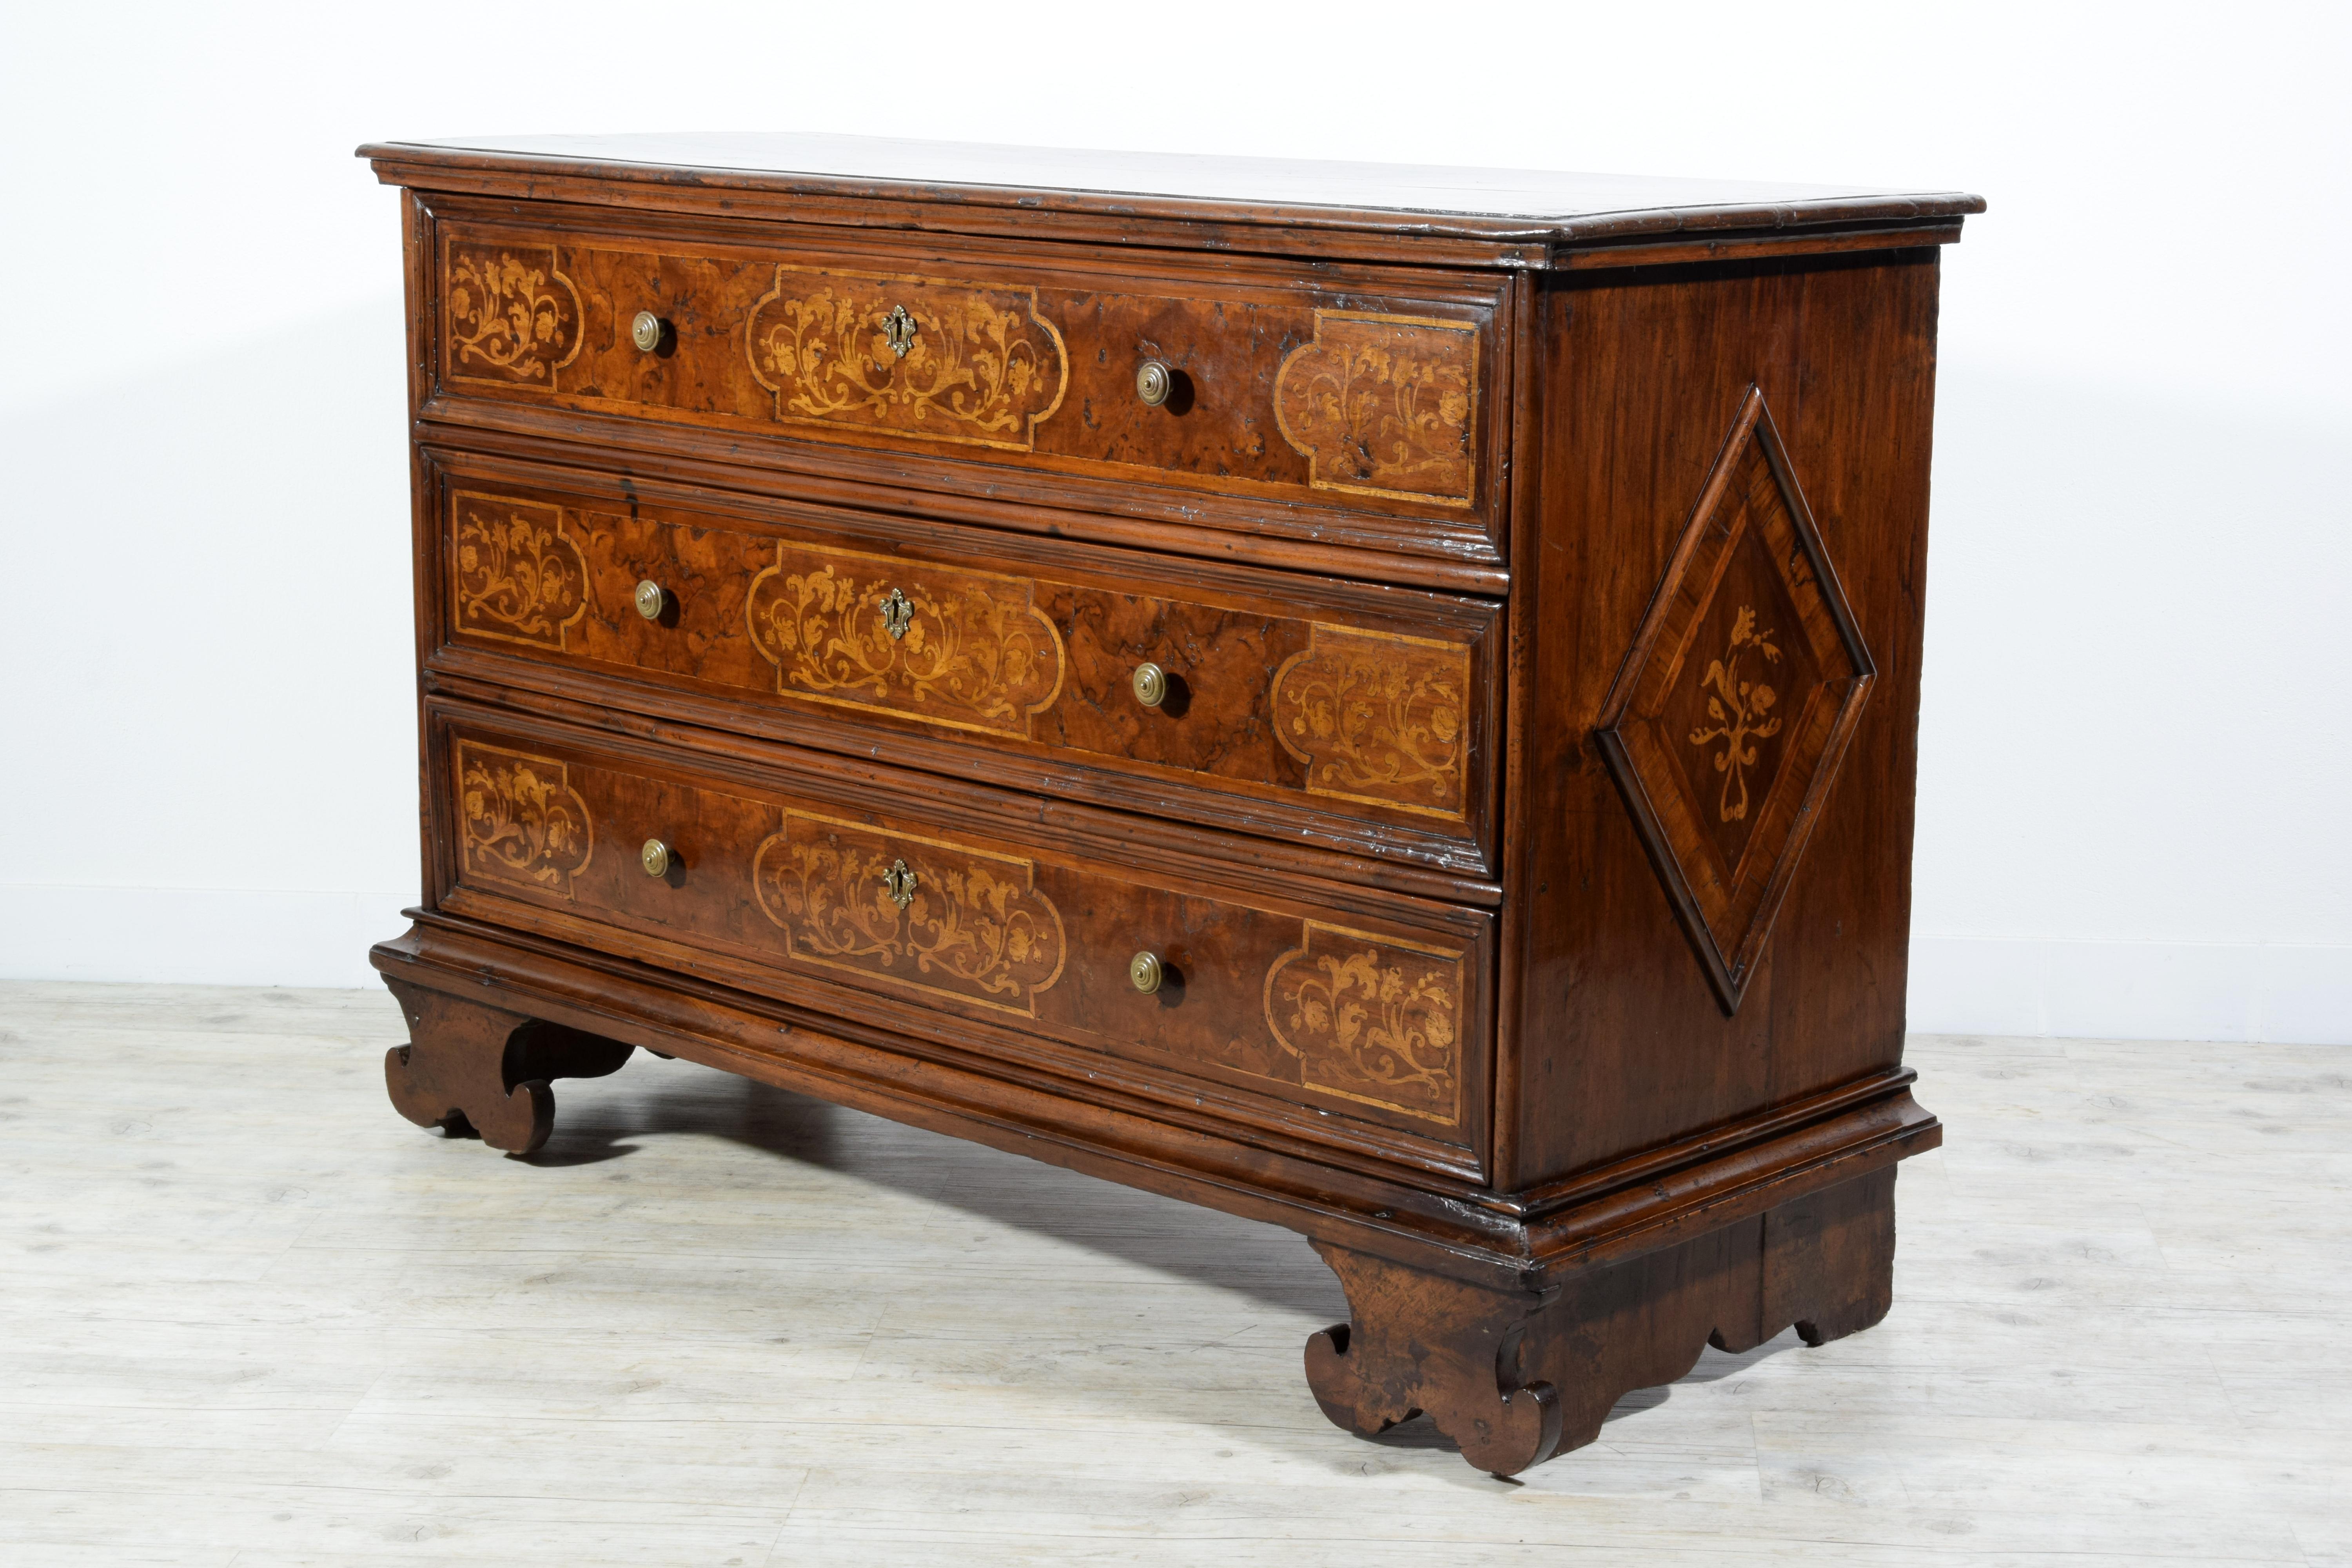 Hand-Carved 17th Century, Italian Baroque Large Walnut Chest of Drawers For Sale